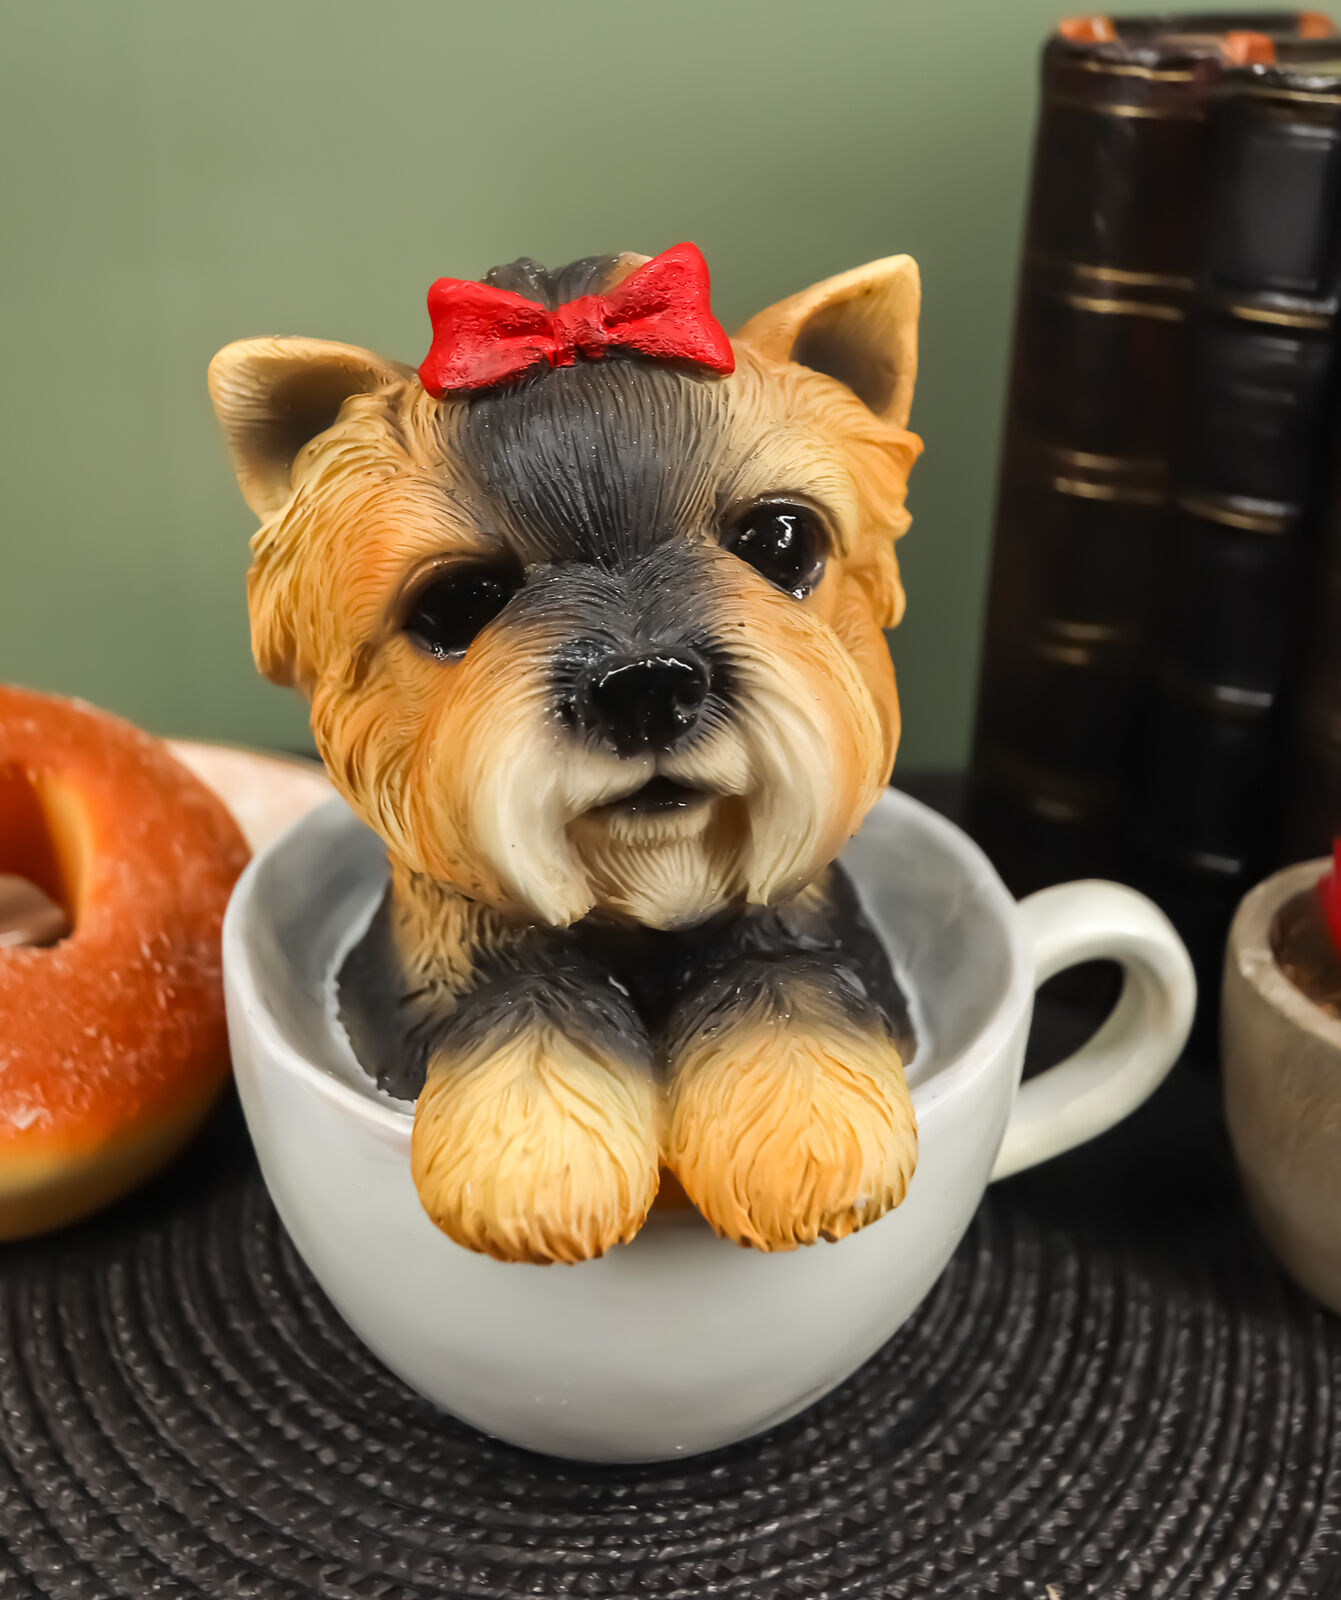 Ebros Realistic Adorable Yorkie Dog with Red Ribbon in Teacup Statue 6\